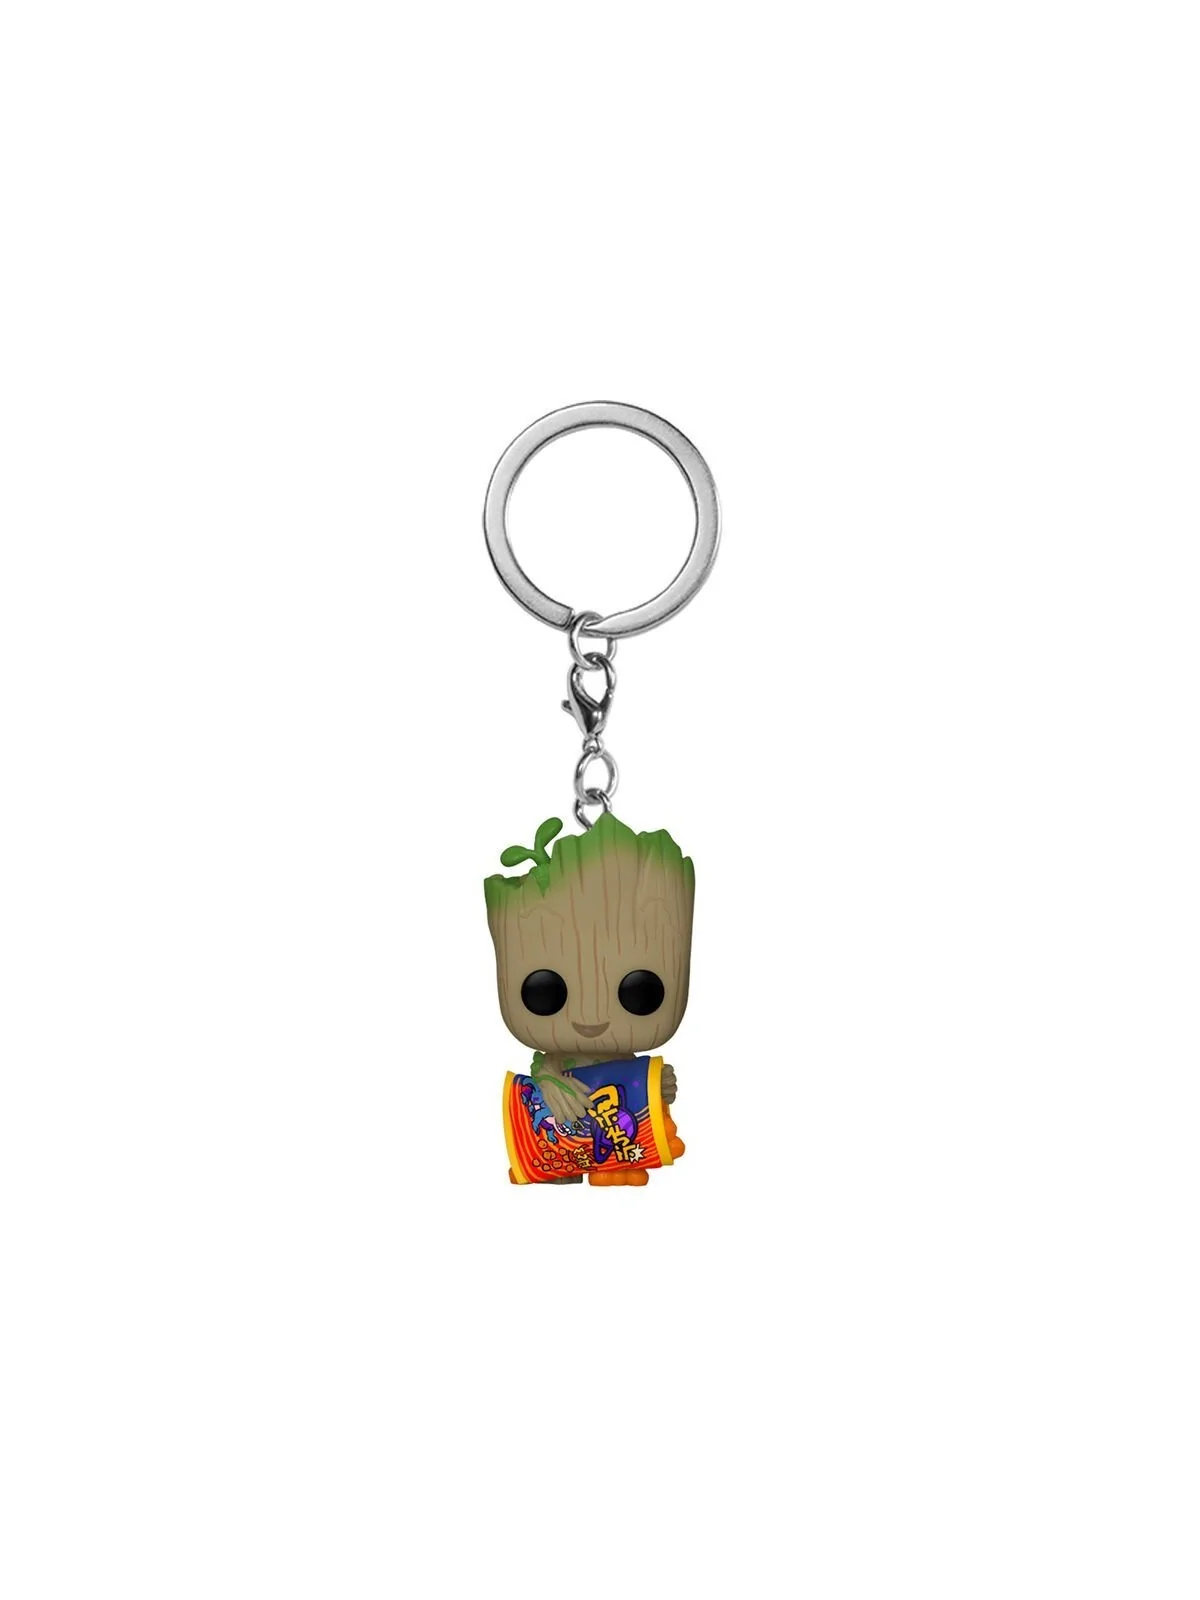 Comprar Llavero Funko Pocket POP! Marvel I am Groot: Groot with Cheese